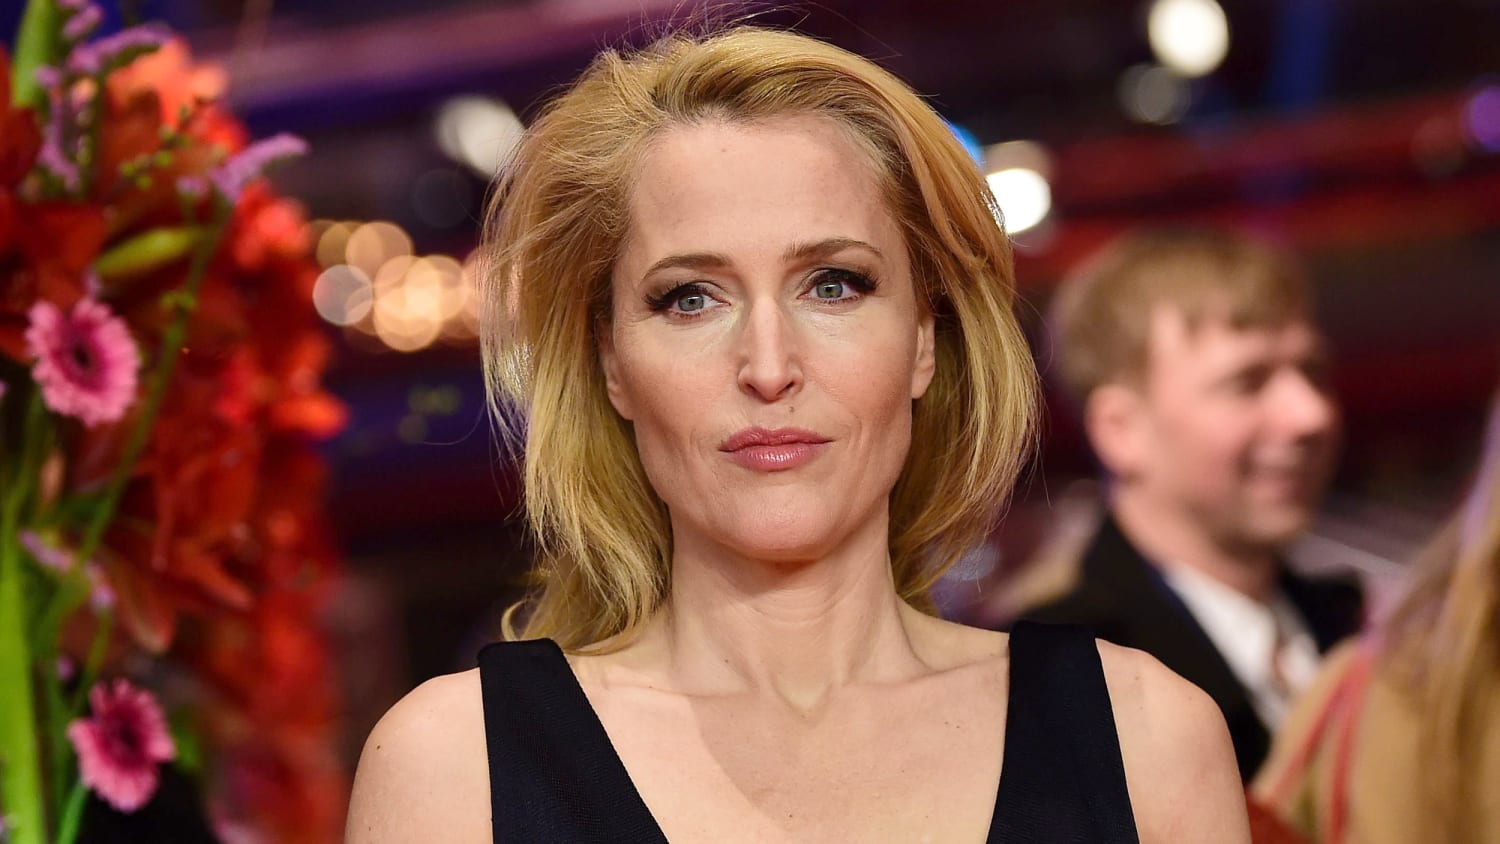 Gillian Anderson opens up about struggle with mental health, anxiety.